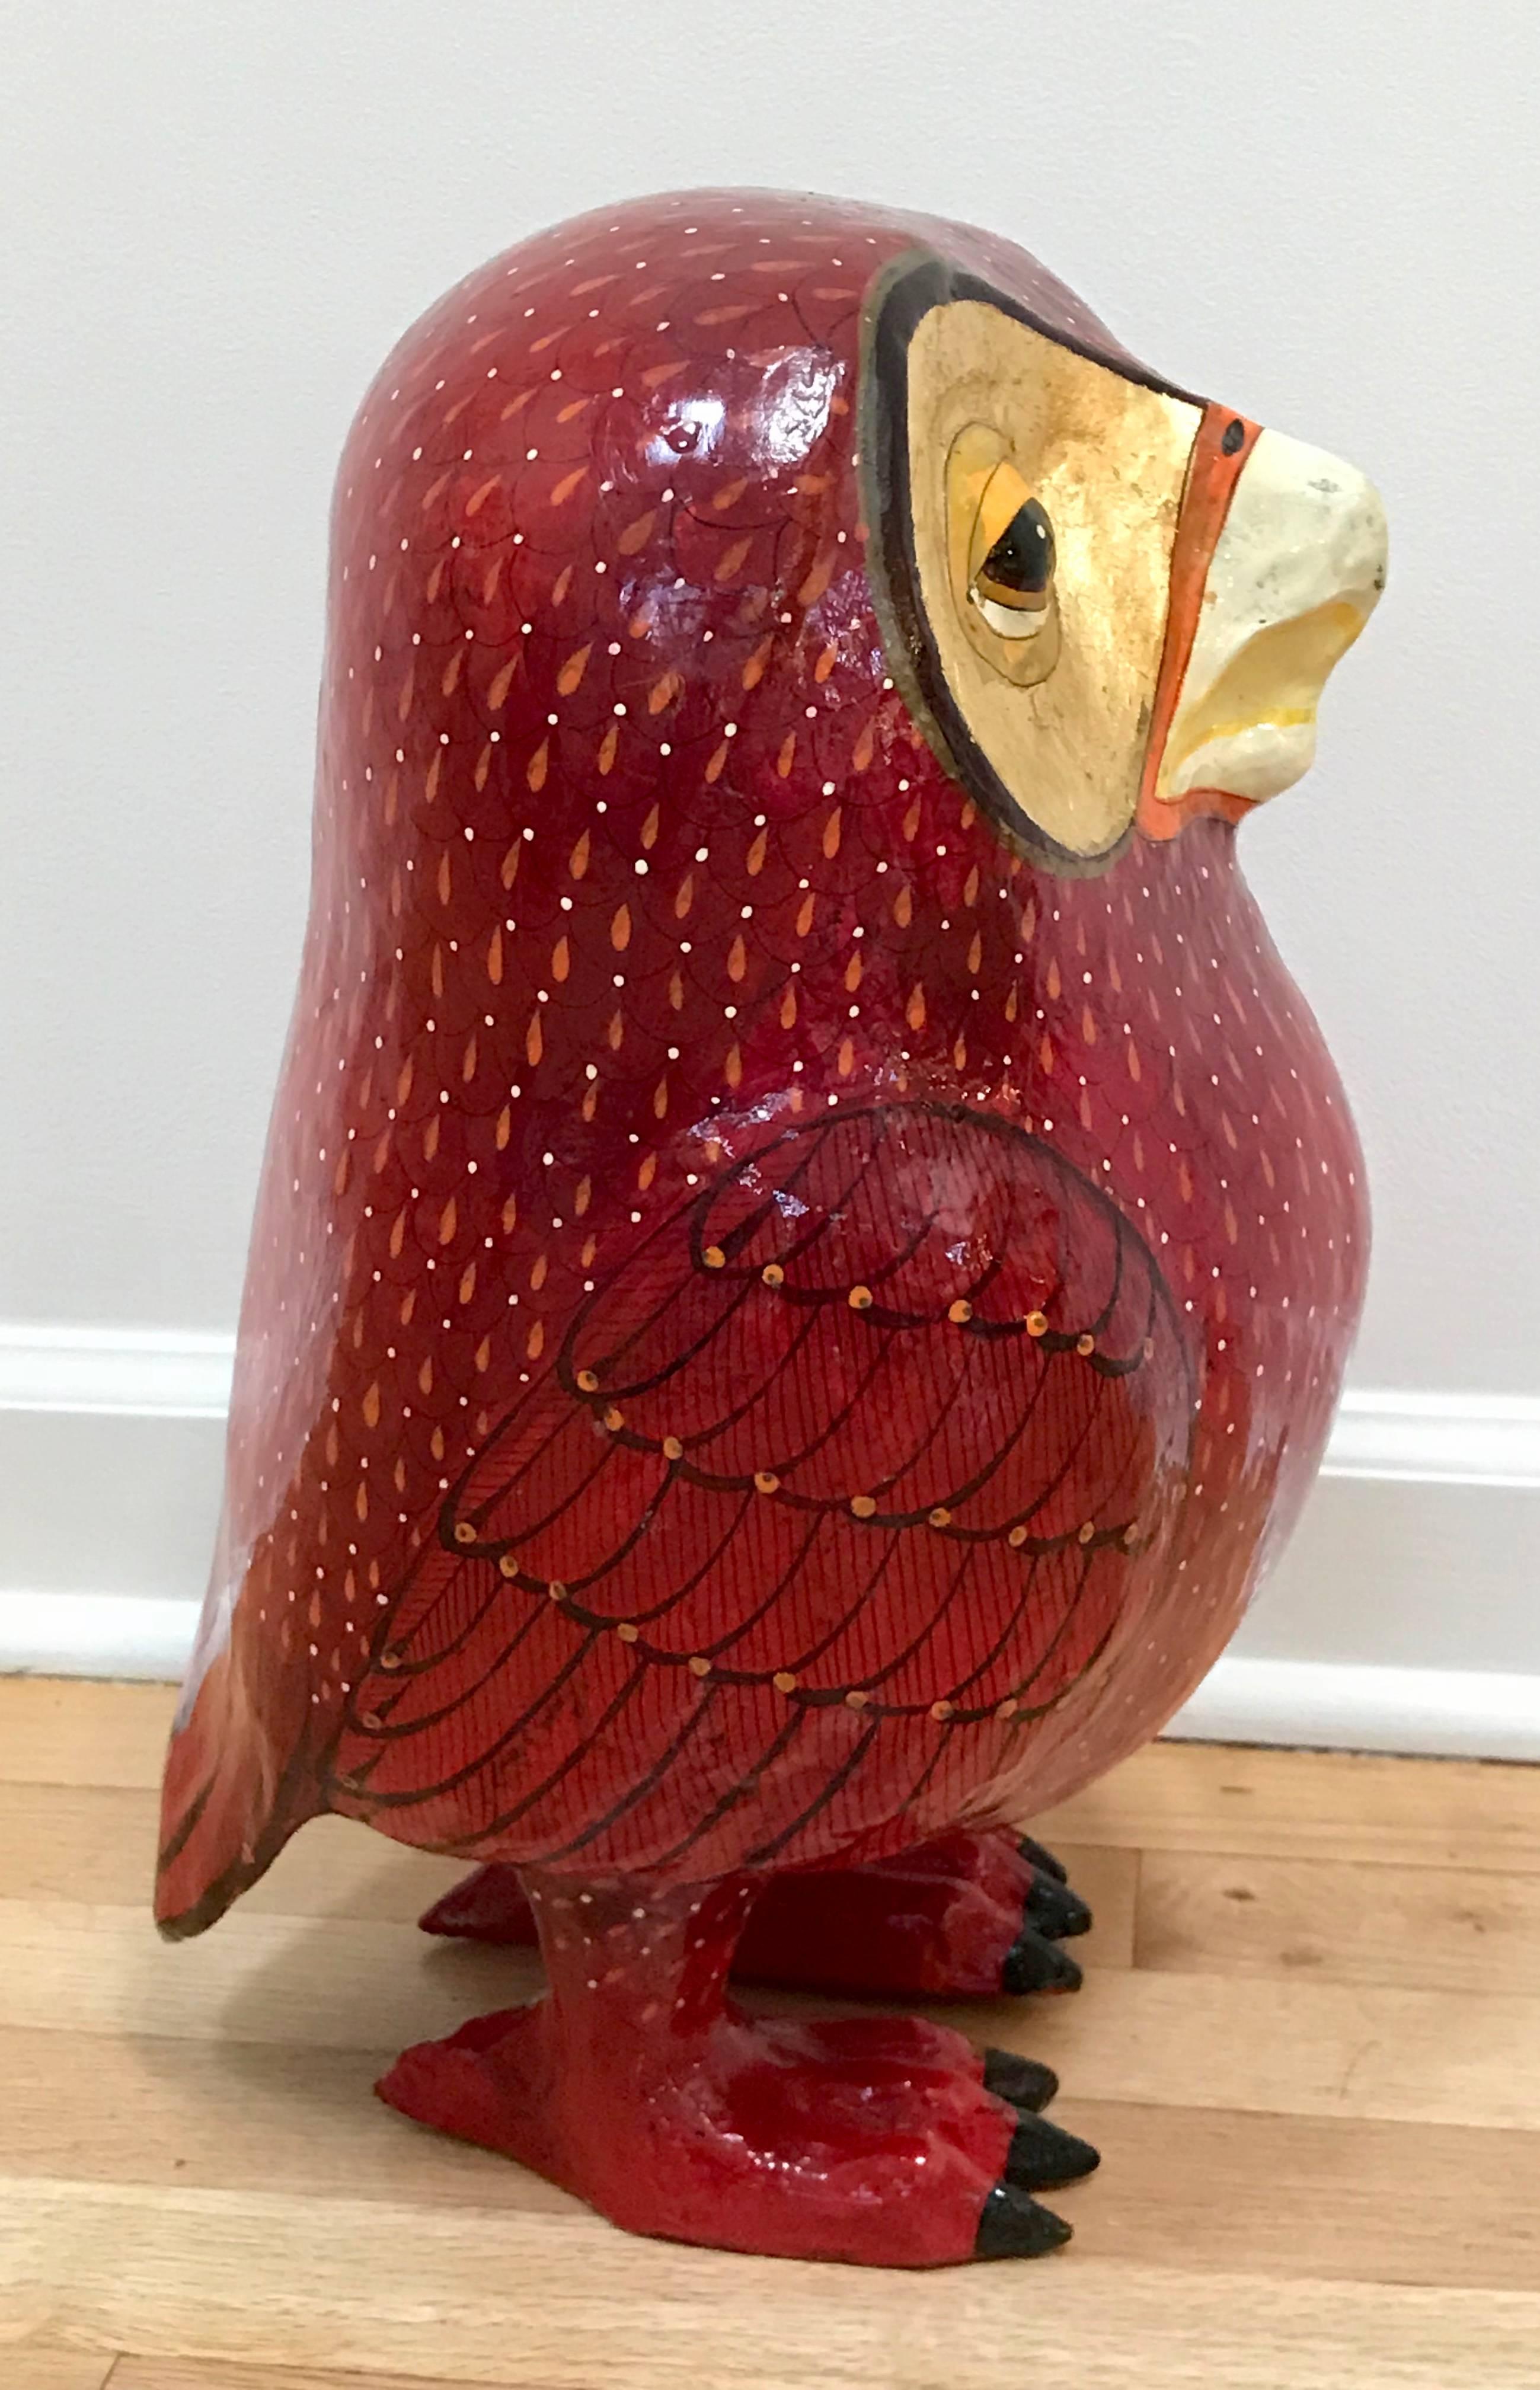 Arts and Crafts Rare Sergio Bustamante Paper Mache Vibrant Red and Gold Owl, 1980s, Mexico